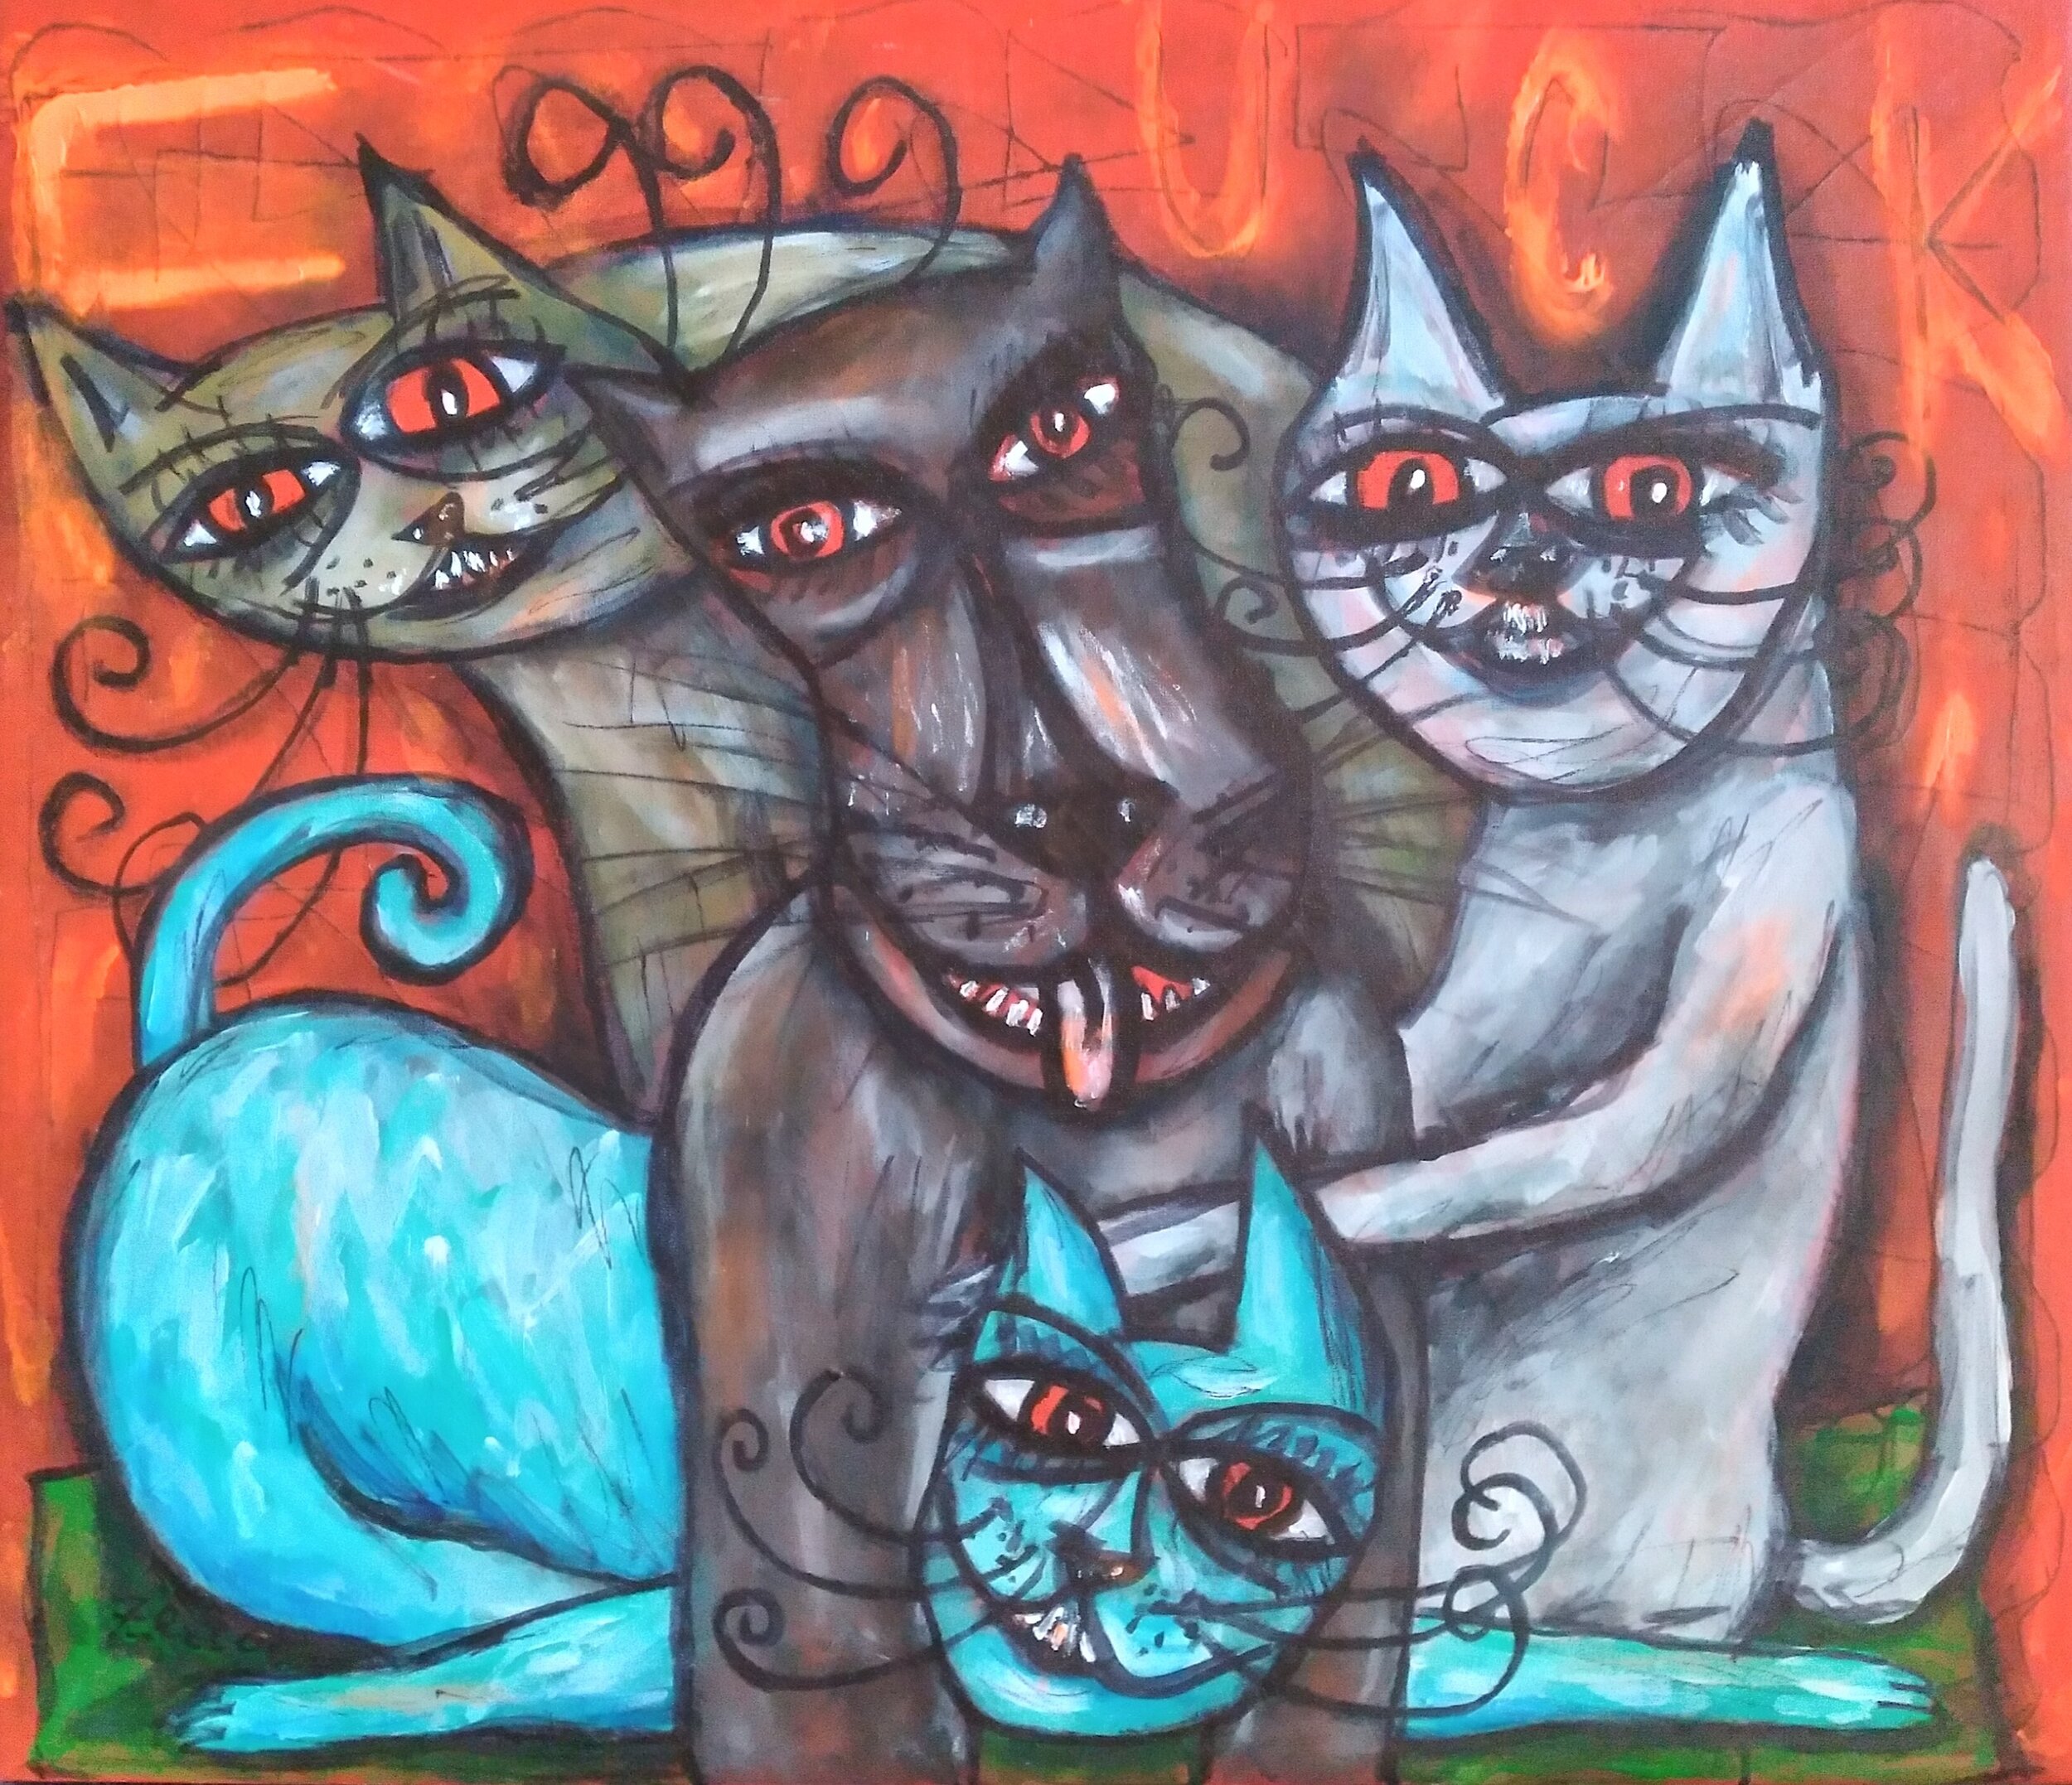 Cats and Dogs, 2020. Oil, acrylic, ink on canvas. 22" x 26".